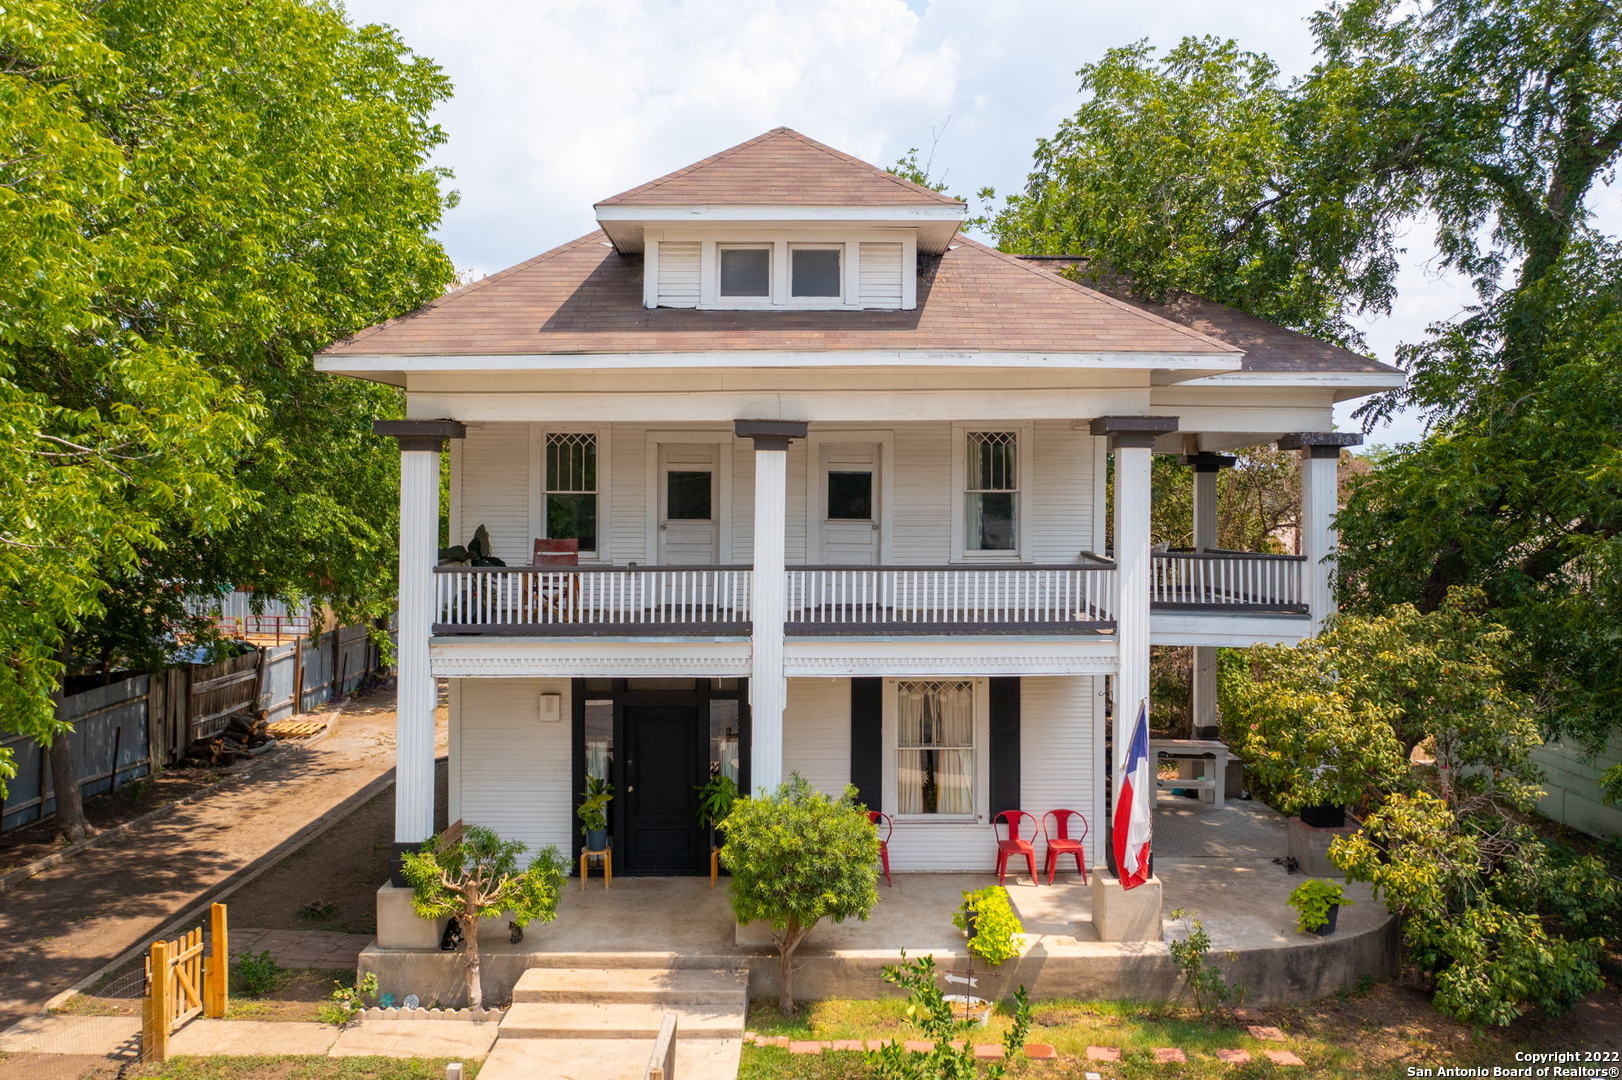 This 1920 Historical beauty, flaunts its irresistible curb appeal, highlighting the circular wrap around covered porch.   With 2232 square feet of living space, this home offers 4 bedrooms, 2 bathrooms, and 1 half bathroom.   From the living room you are able to access the mother-in-law suite, the mother-in-law suite includes   1 bathroom, kitchen/dining area bedroom/living area and personal entry door.   This room can be closed off or left connected to home for parents, grandparents, kids, teens, rental income, etc.   Unwind after long days in your spacious jack and jill balcony, overlooking the city or walk upstairs to find a sunny loft with access to the second level personal balcony from the master bedroom.   The grand foyer's elegance is displayed by its original front door, chandelier, 10' ceilings, 10 inch baseboards, and ravishing hardwood flooring.  This Historic beauty provides superior quality, design and charm to exceed all of your wildest dreams.   Just a short drive to local shopping, state-of-the-art restaurants, walking trails and state parks, this home is situated in the heart of San Antonio.   If you are looking for a historical home with class, elegance, character, and lots of living  space, including a mother in law suite and plenty of outdoor space this is the one for you! Schedule your showing today.